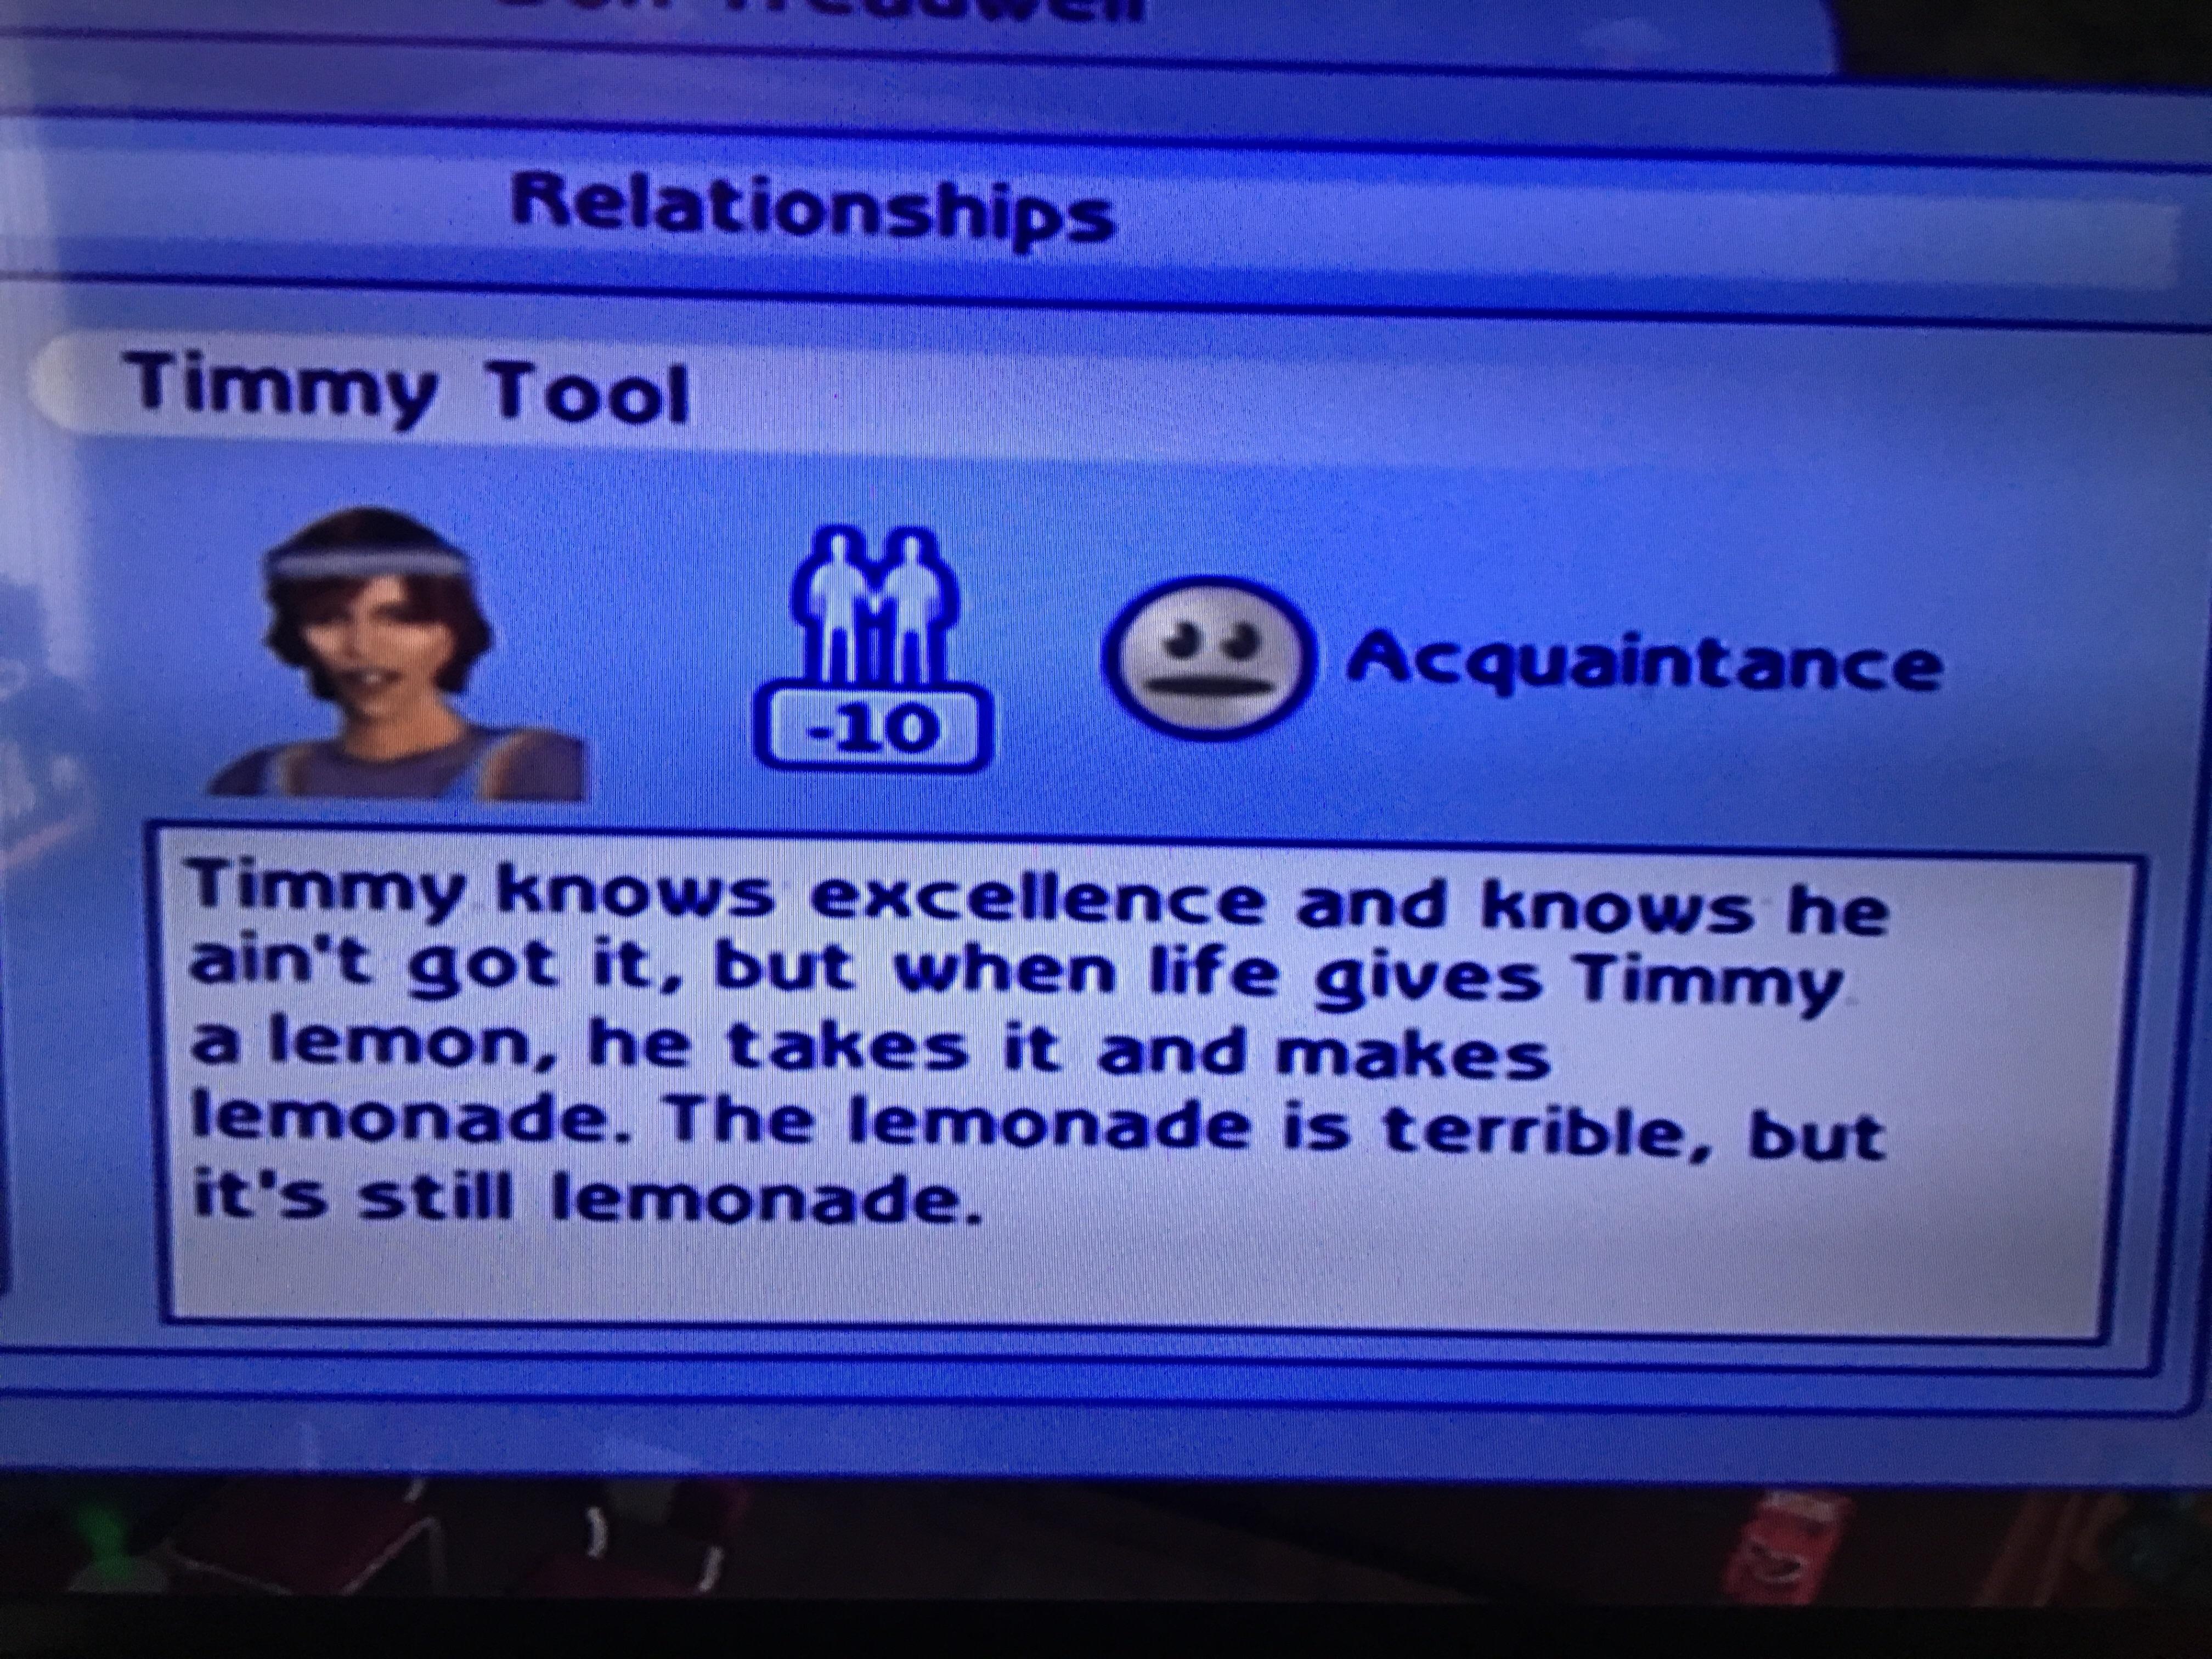 timmy tool sims 2 - Relationships Timmy Tool Acquaintance 10 Timmy knows excellence and knows he ain't got it, but when life gives Timmy a lemon, he takes it and makes lemonade. The lemonade is terrible, but it's still lemonade.